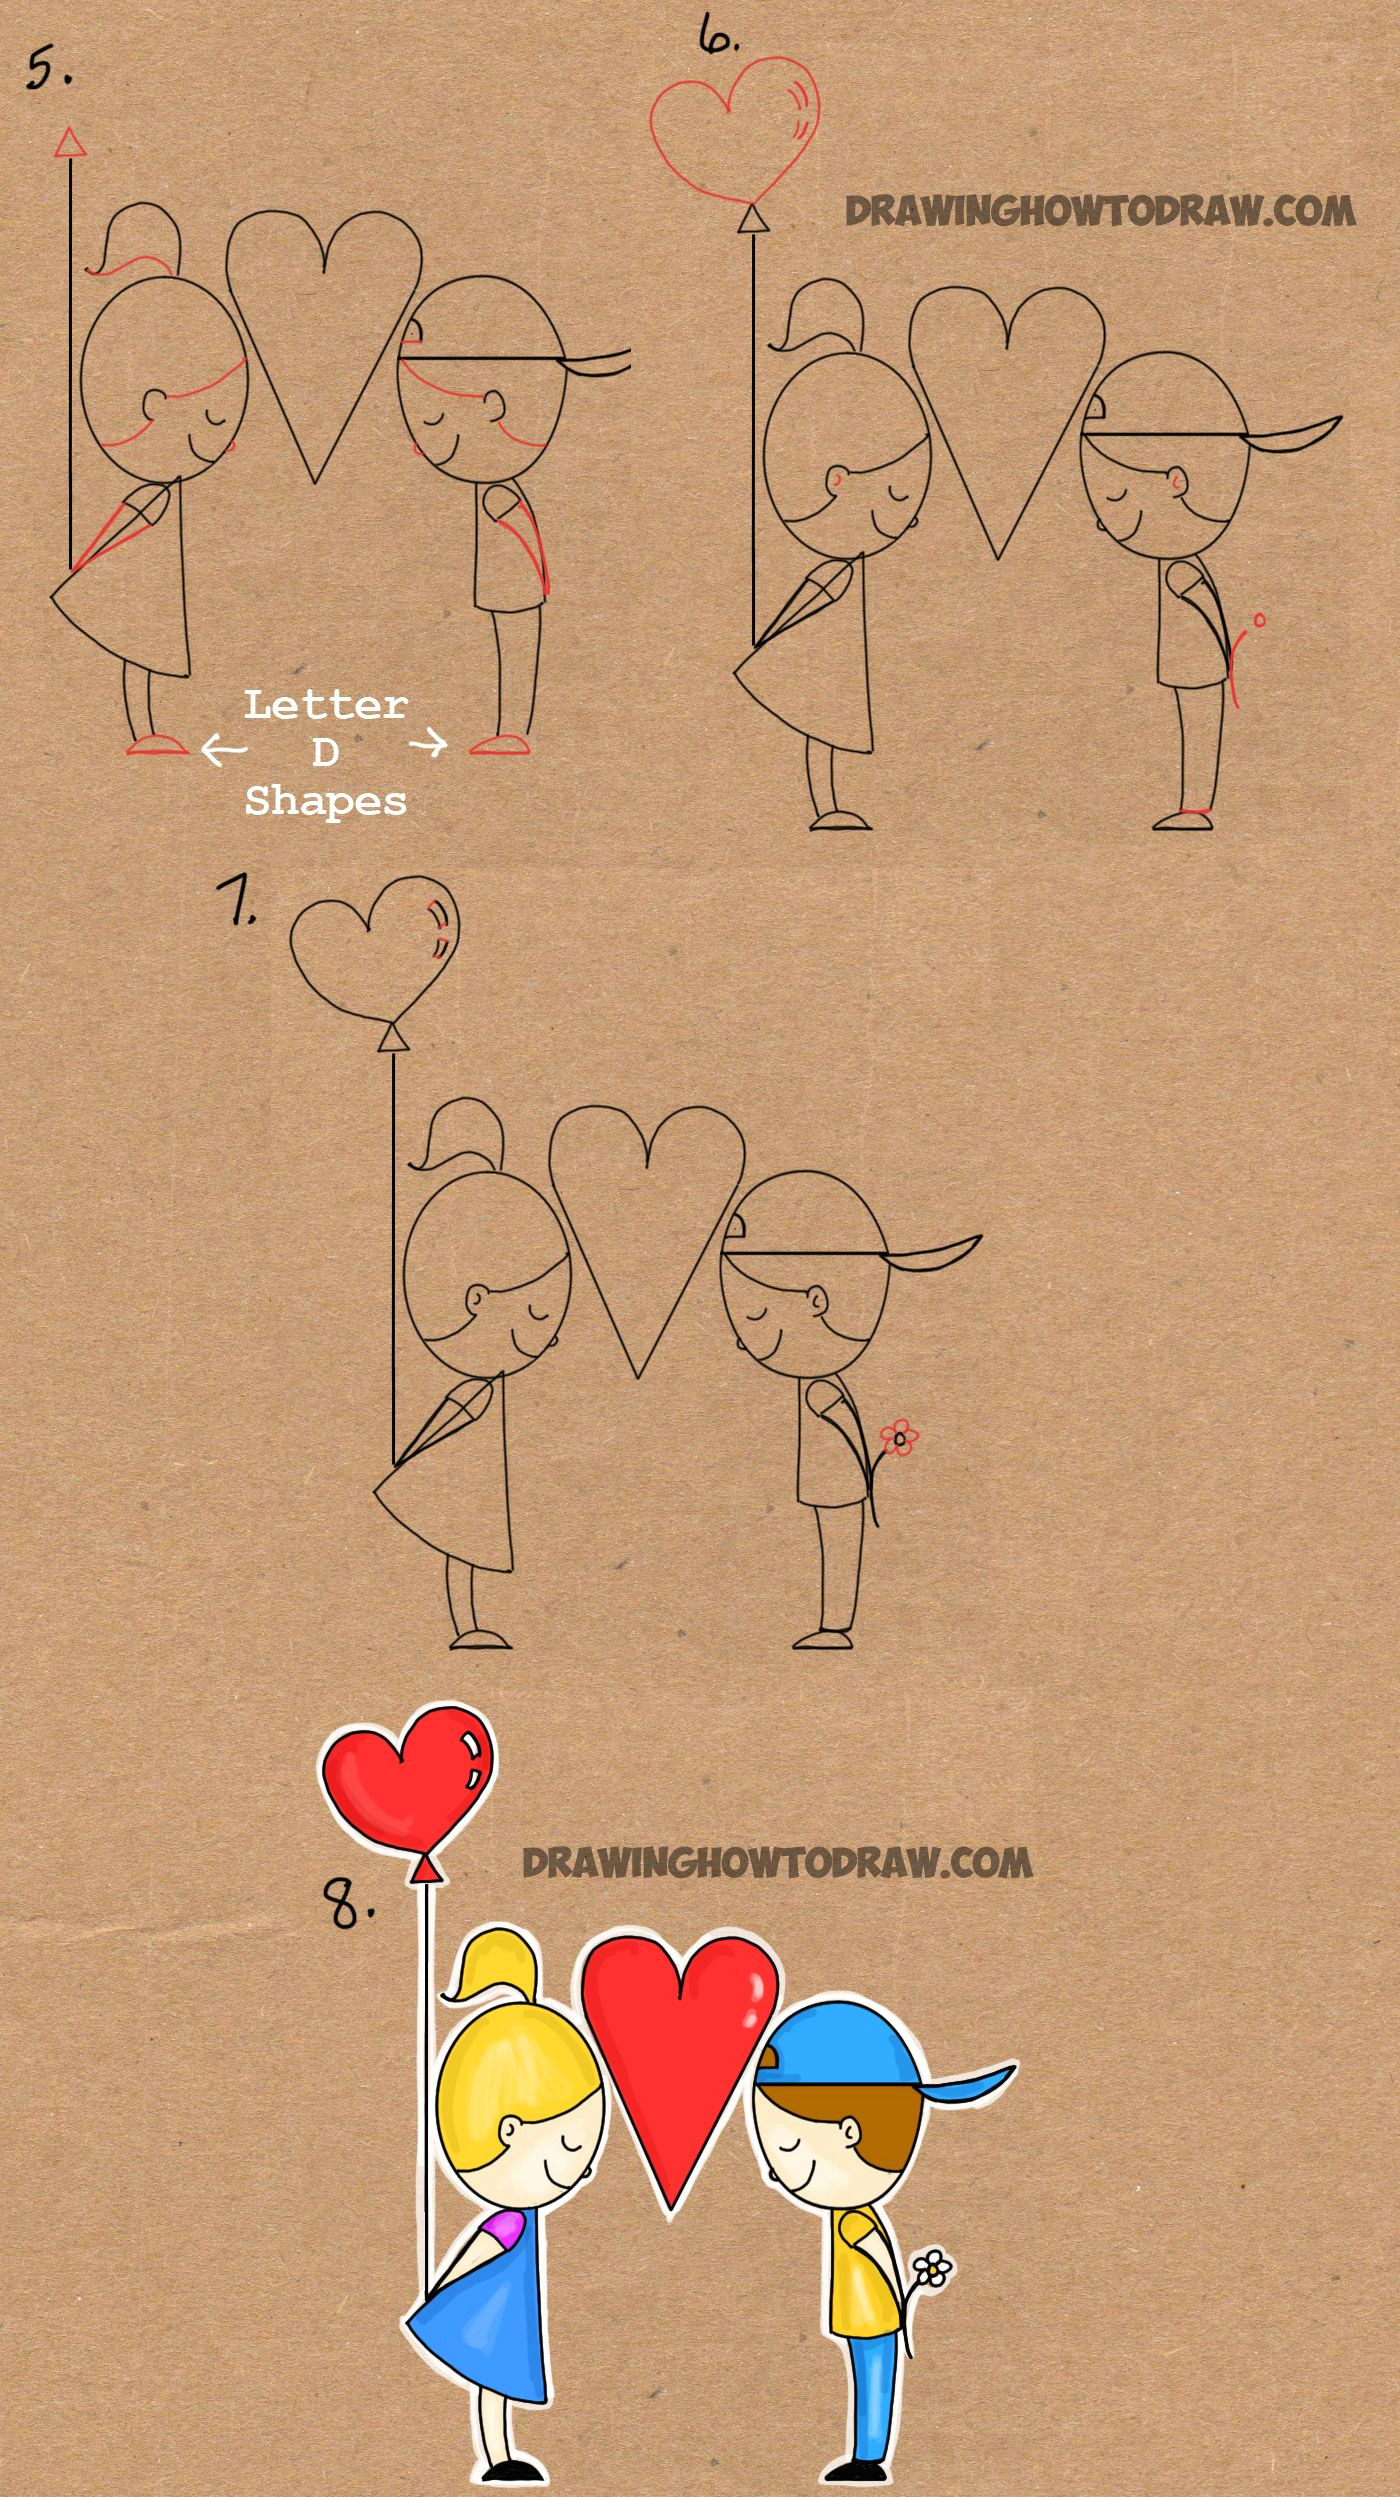 I Love Cartoon Drawing How to Draw Cartoon Kids In Love From the Word Love In This Easy